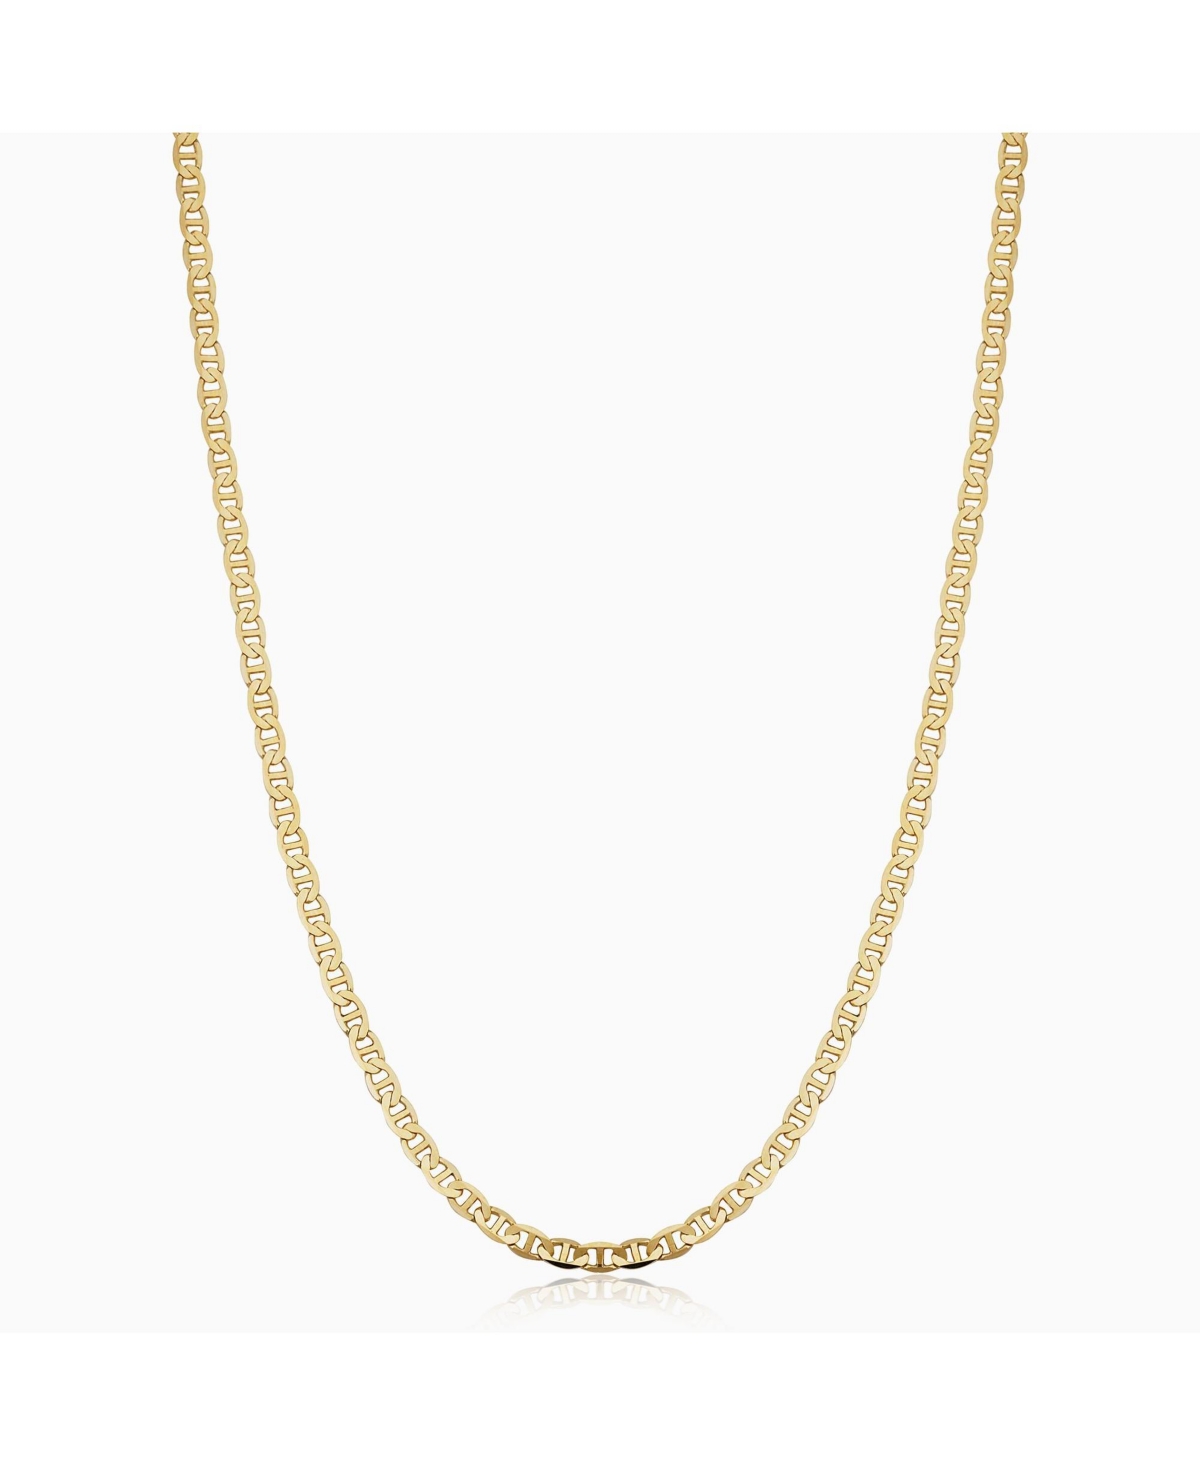 ORADINA MYSTIC MARINER NECKLACE 16" IN 14K YELLOW GOLD